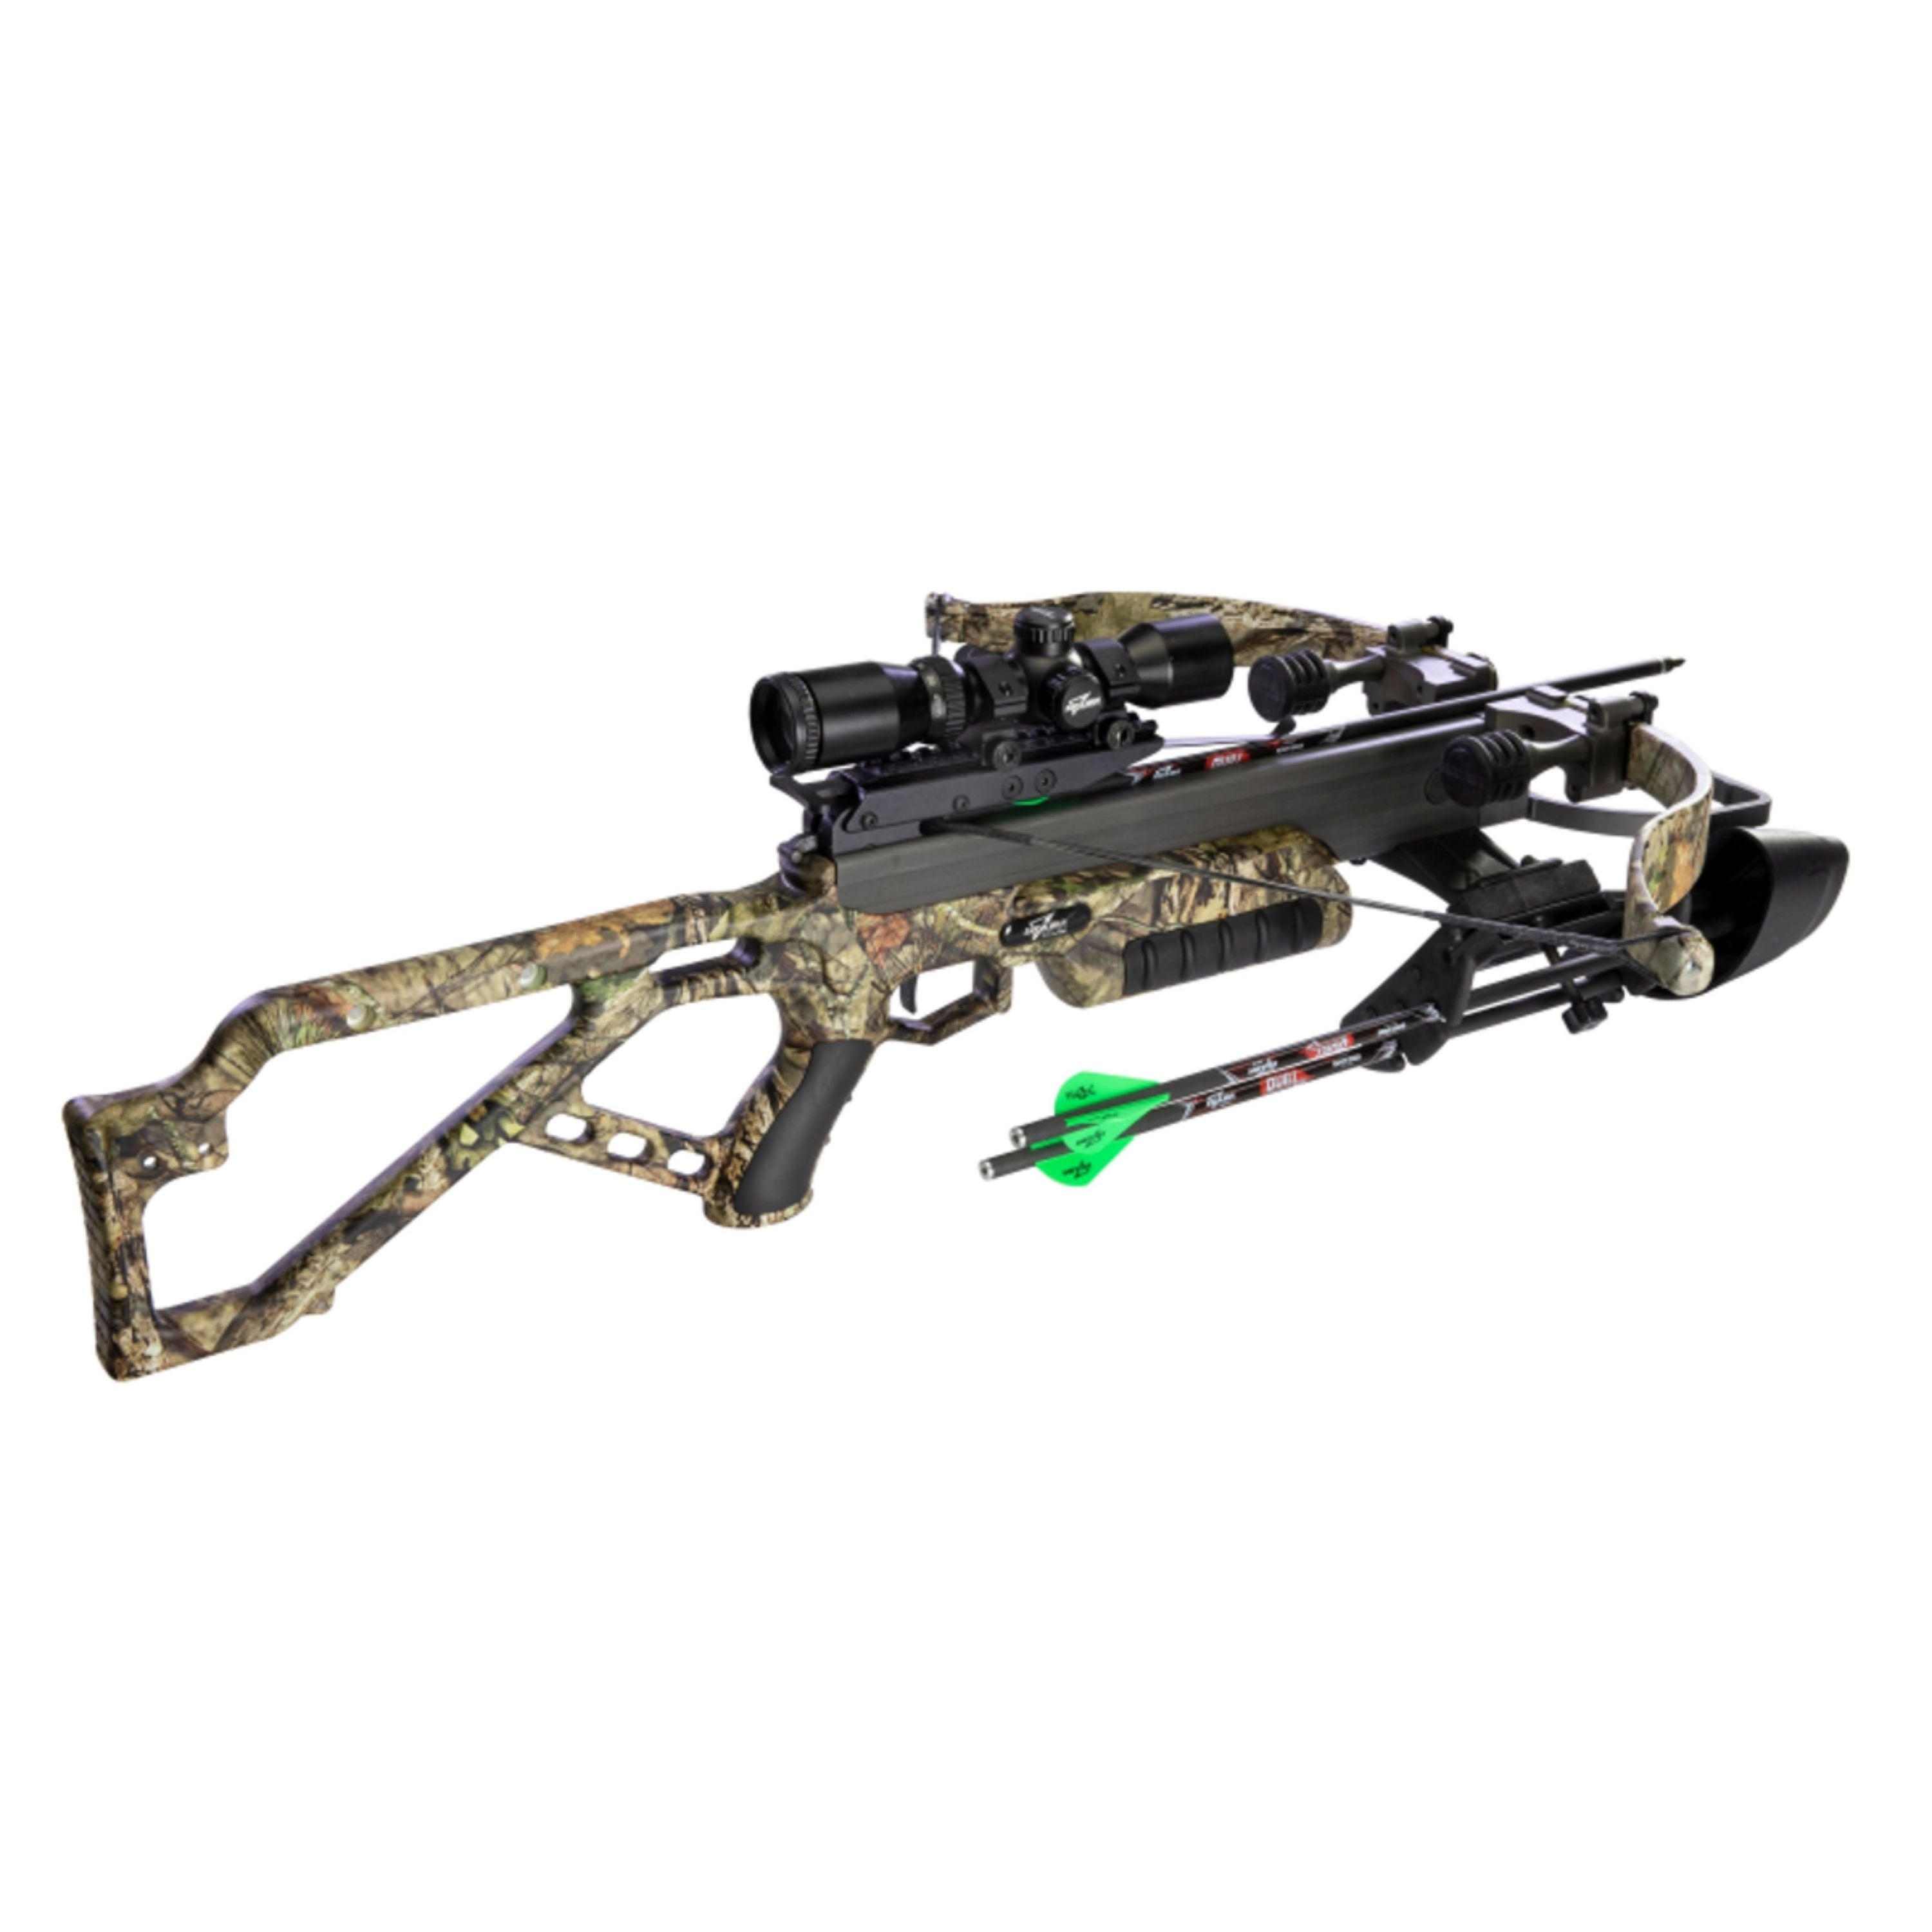 "Micro MAG 340" crossbow